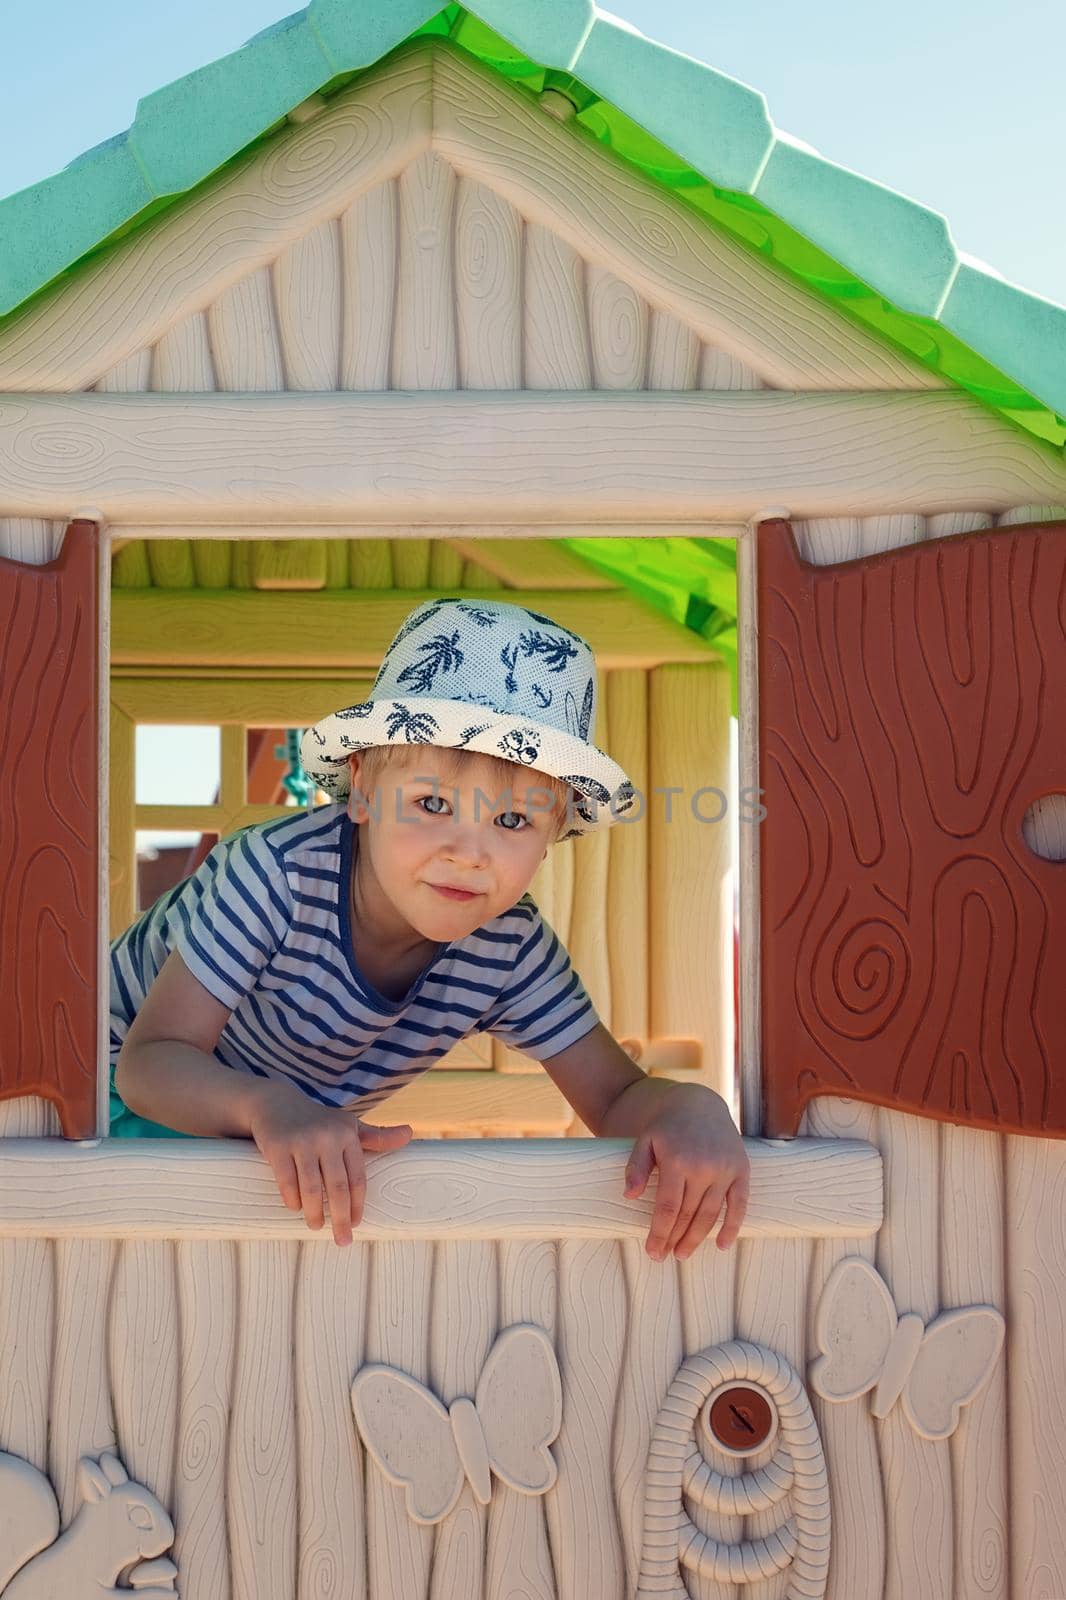 A cheerful little boy in a hat, inside a toy little house, he looks out the window with the shutters straight into the camera